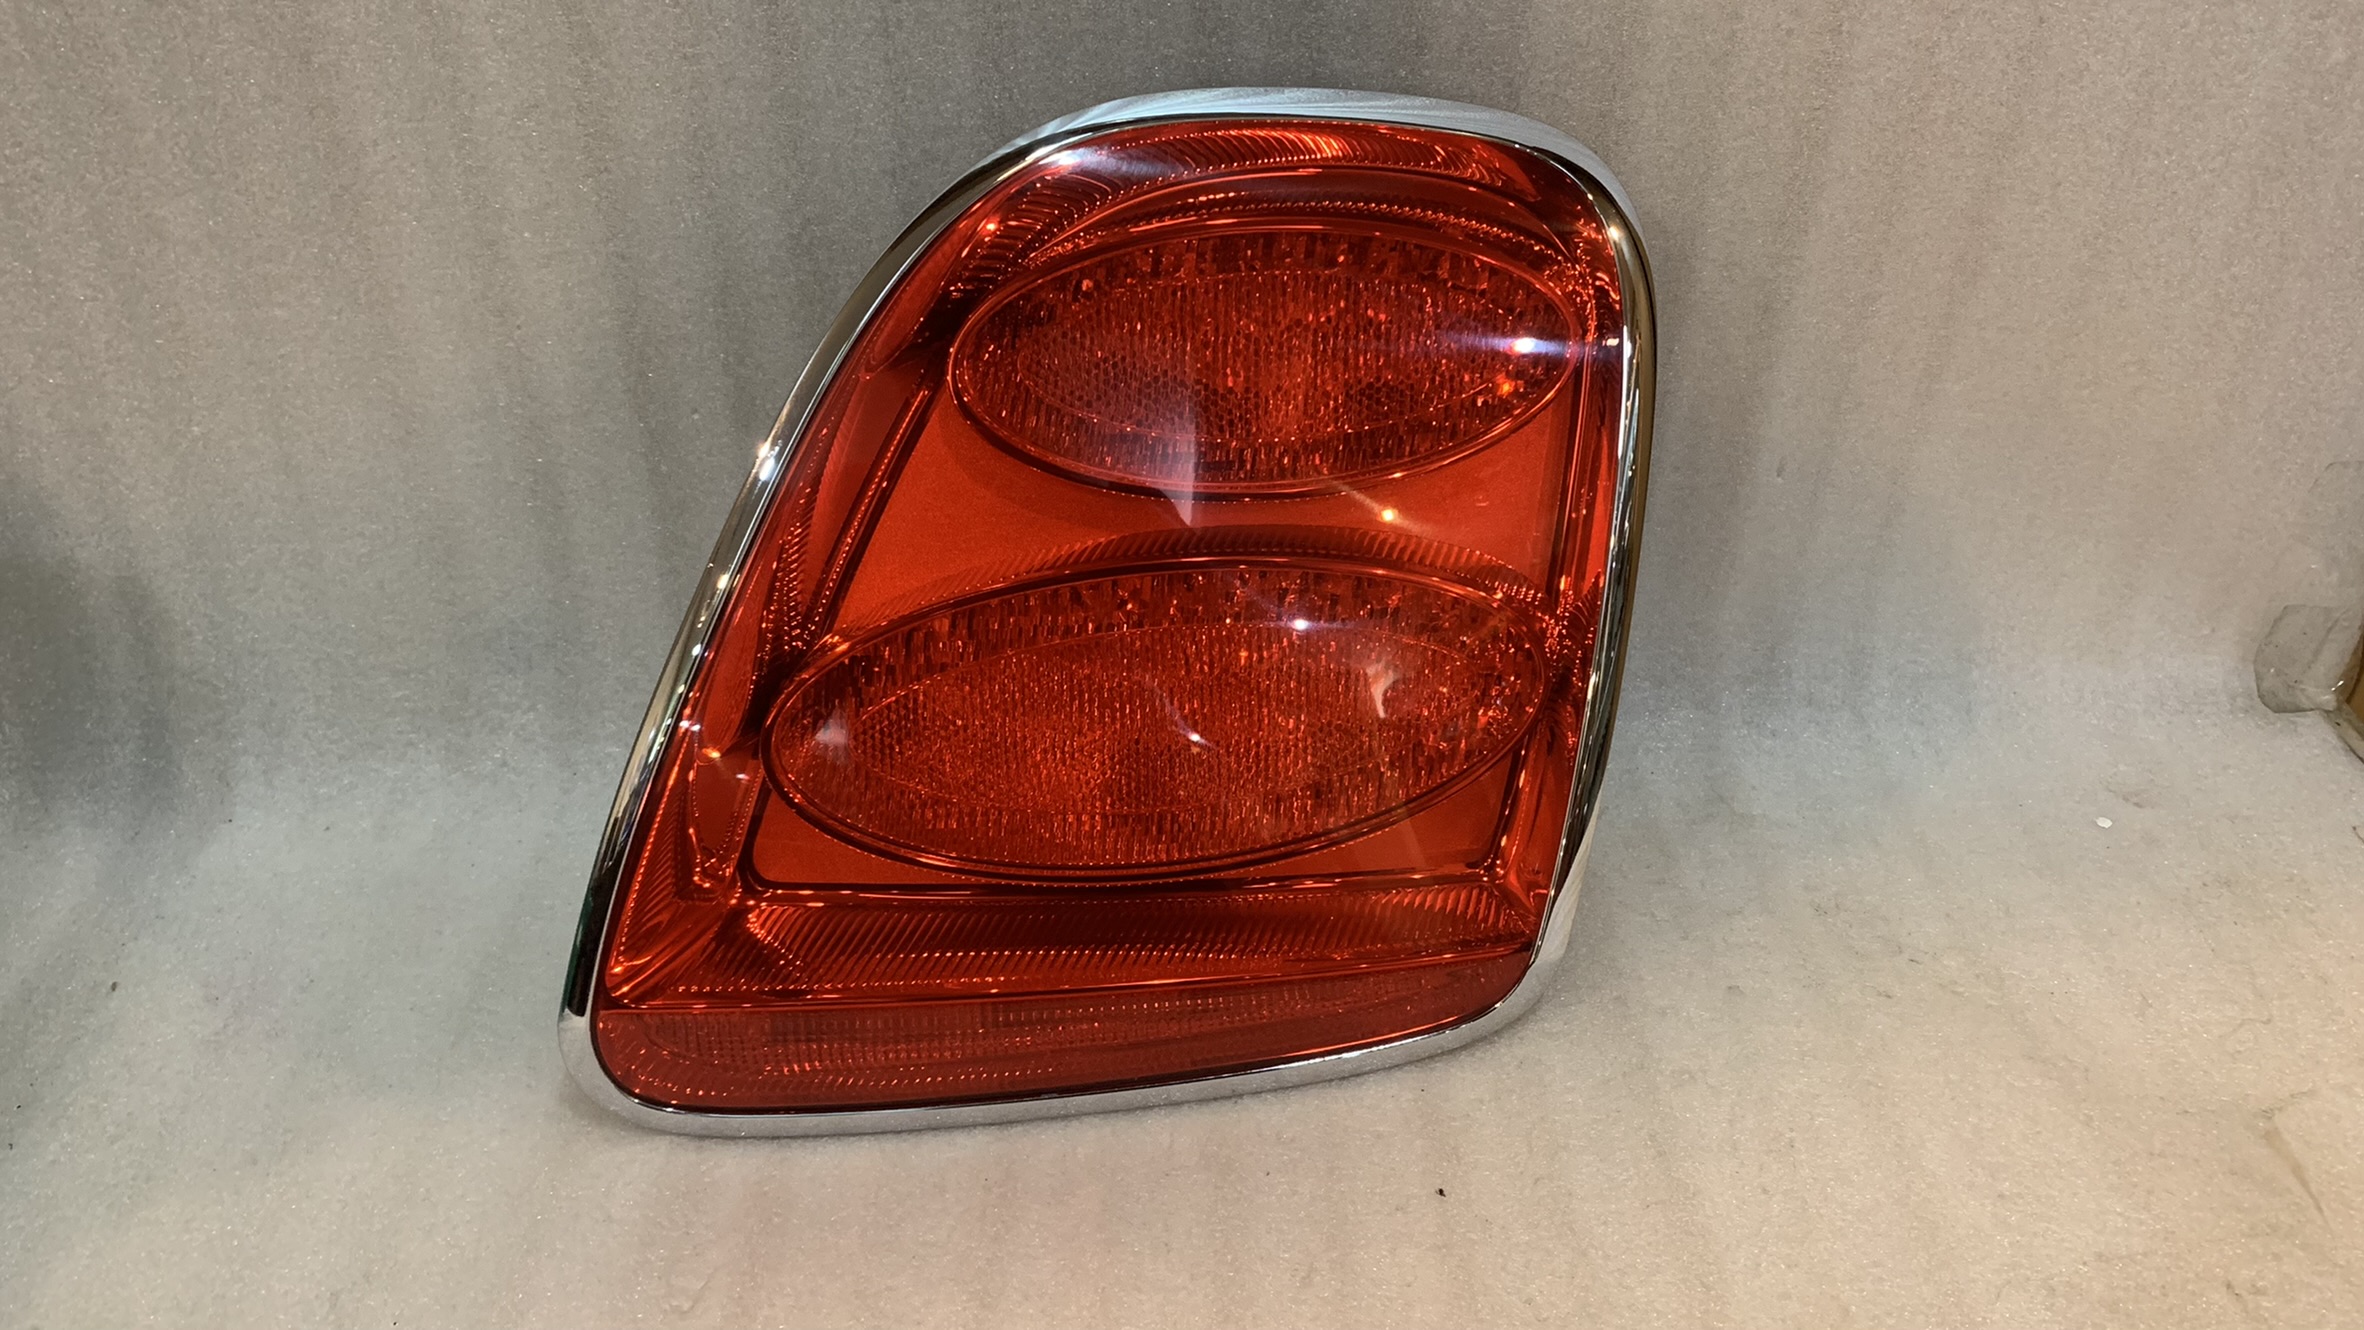 BENTLEY CONTINENTAL FLYING SPUR TAIL LIGHT RIGHT